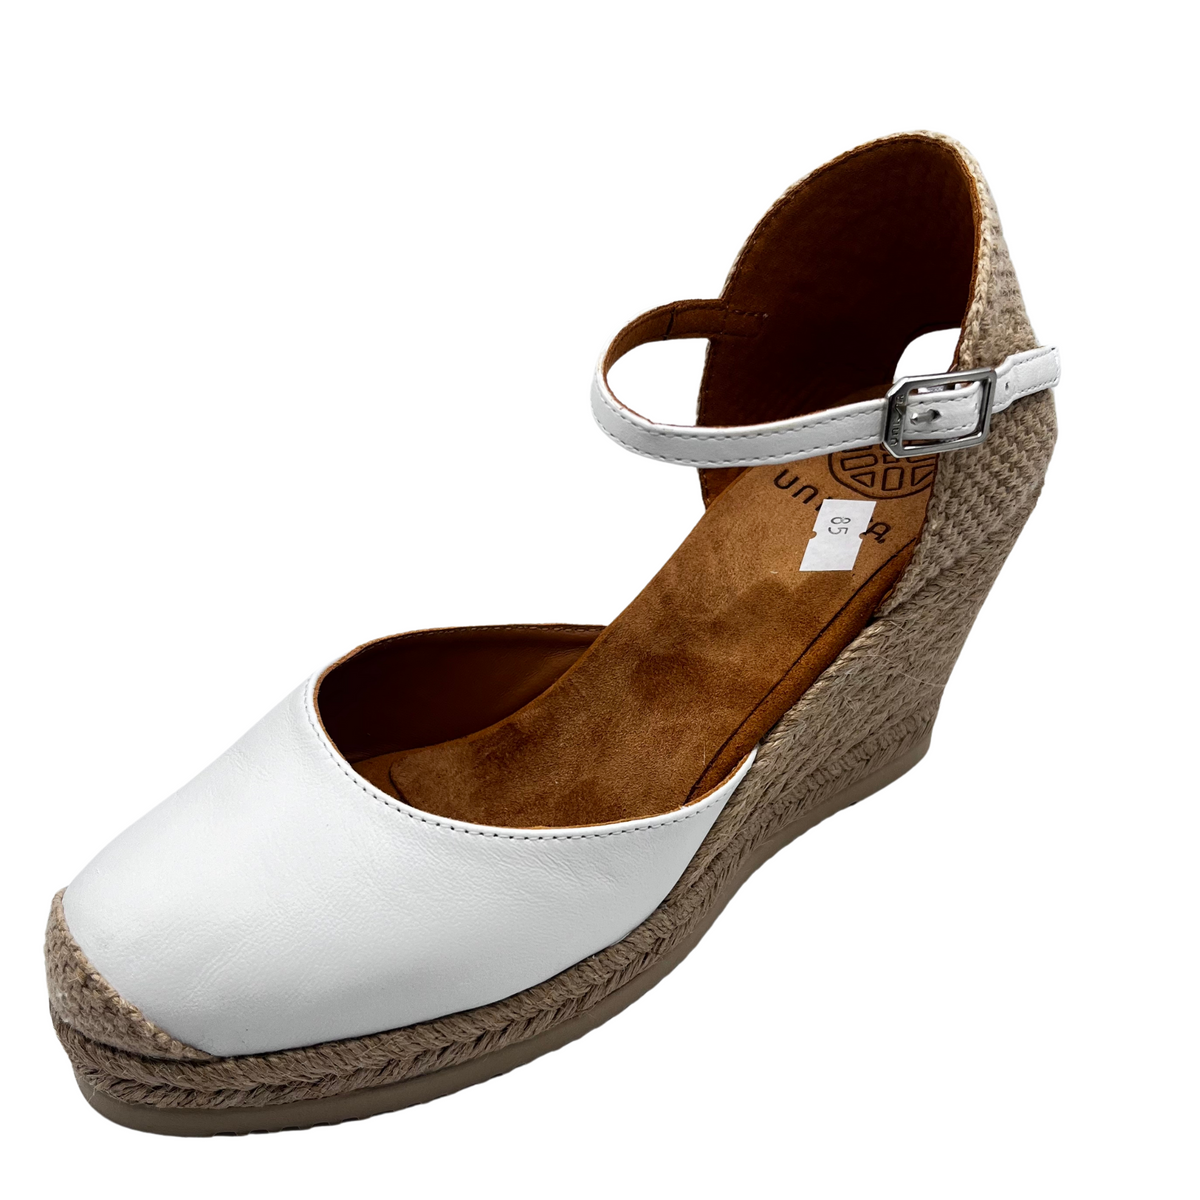 Unisa Leather White Wedge With Woven